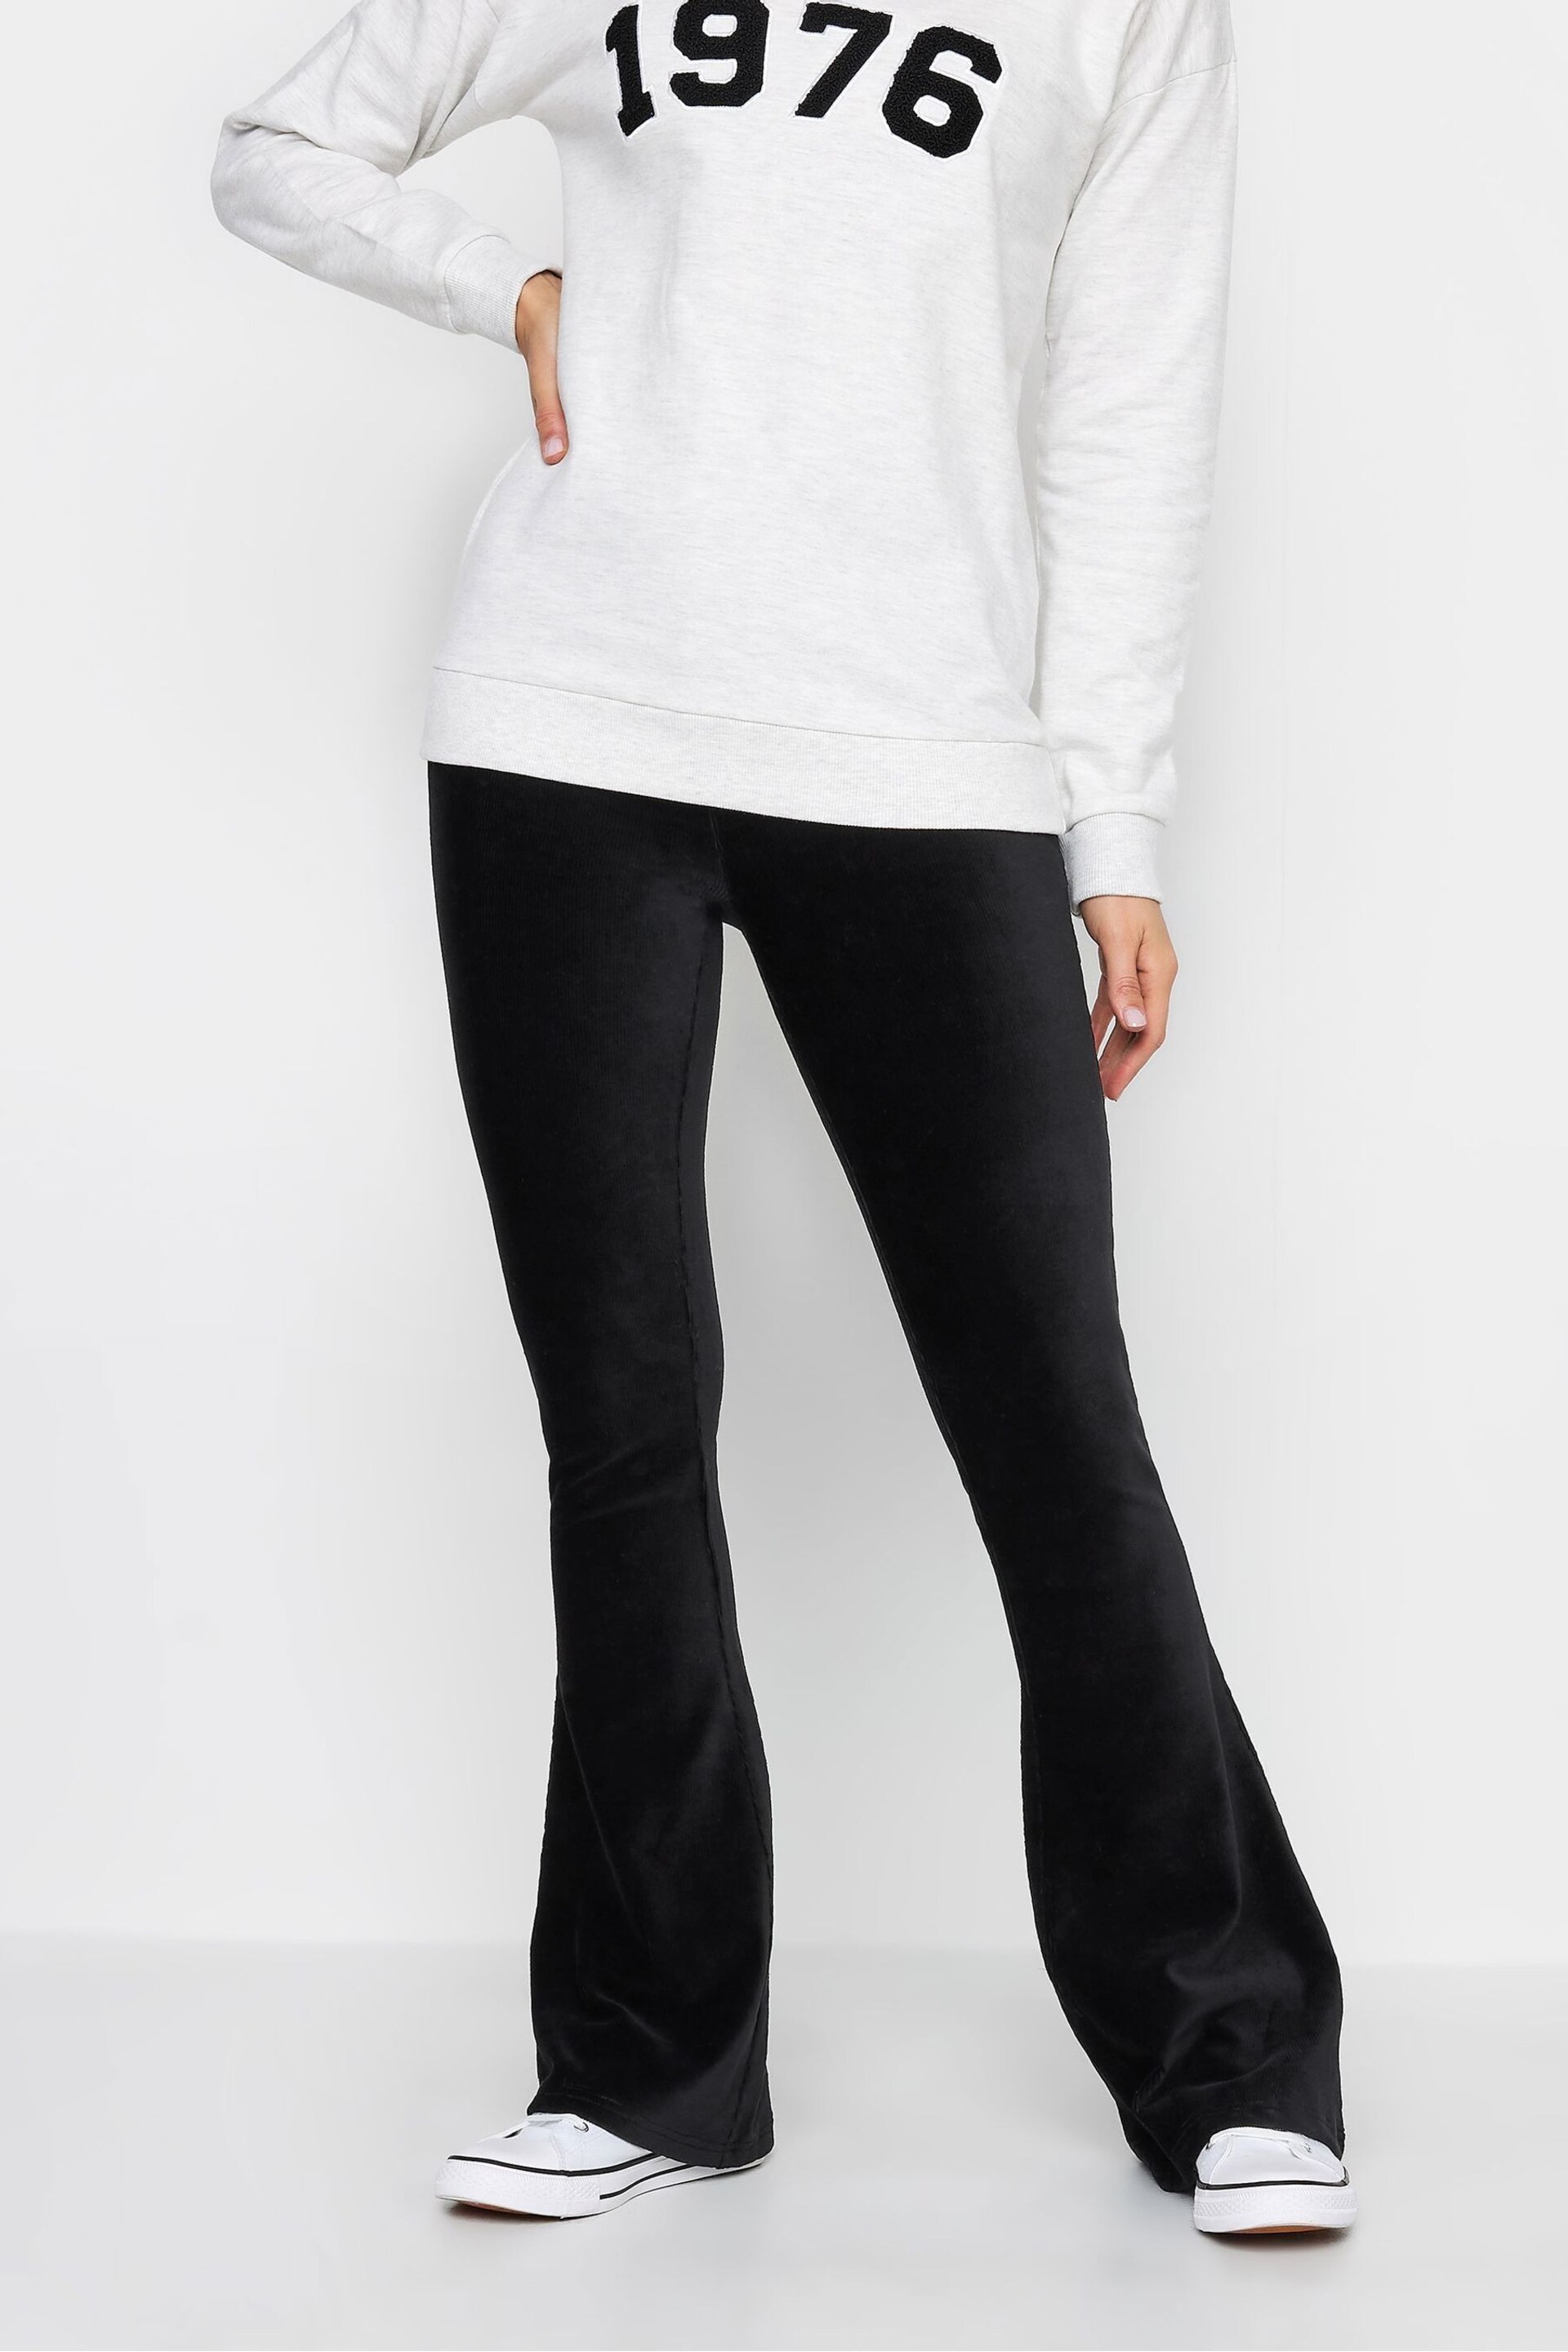 Long Tall Sally Black Cord Kick Flare Trousers - Image 1 of 3